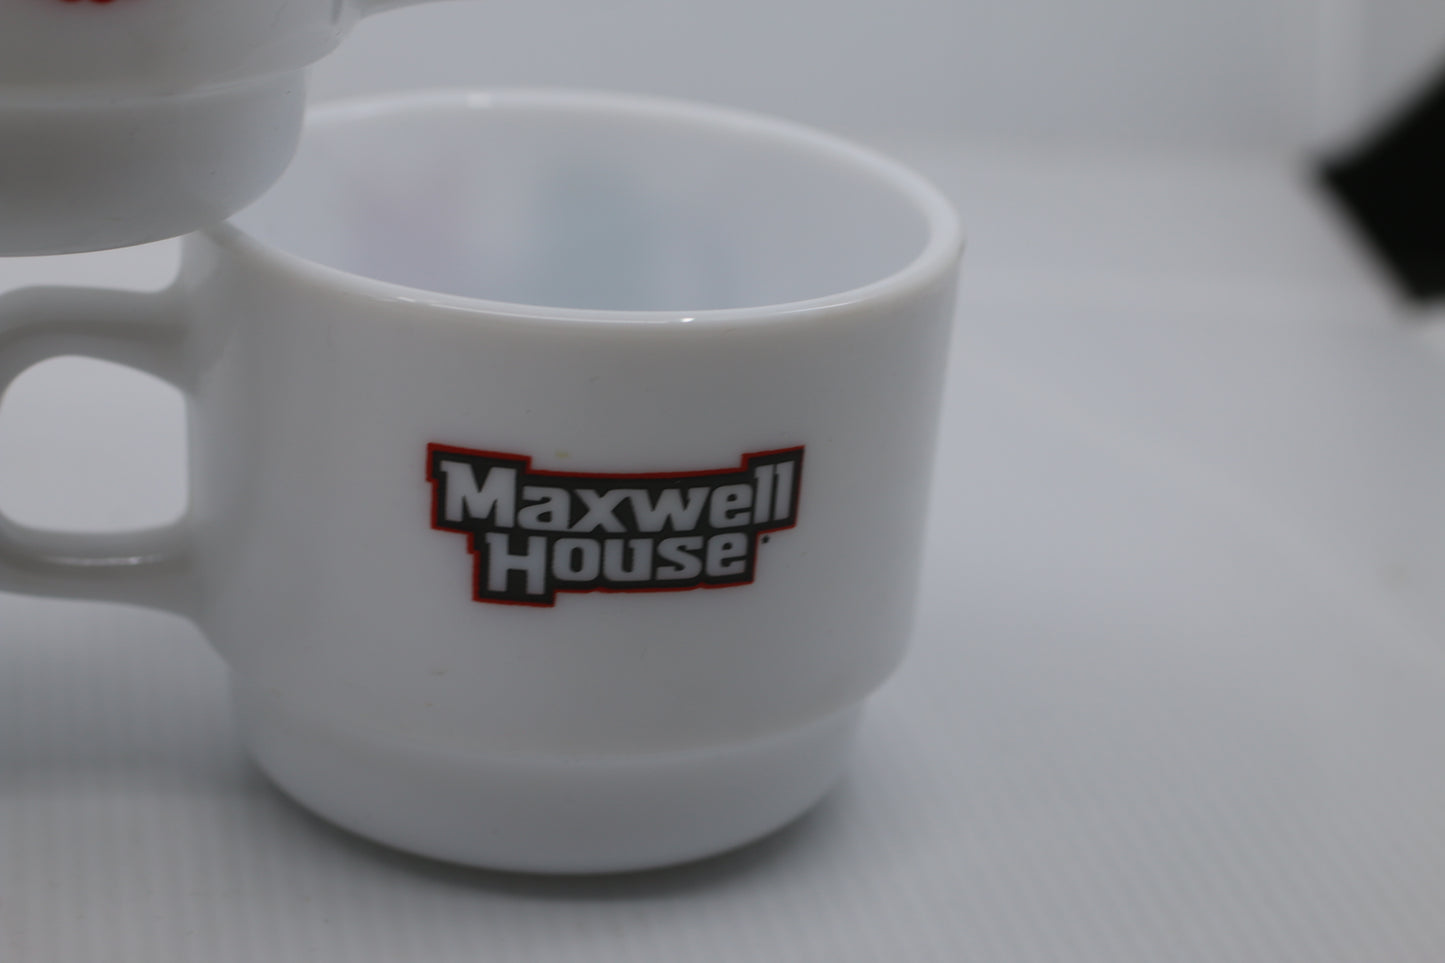 Lot of 3 Arcopal France Set of 3 Maxwell House Small Cappuccino Cups #1